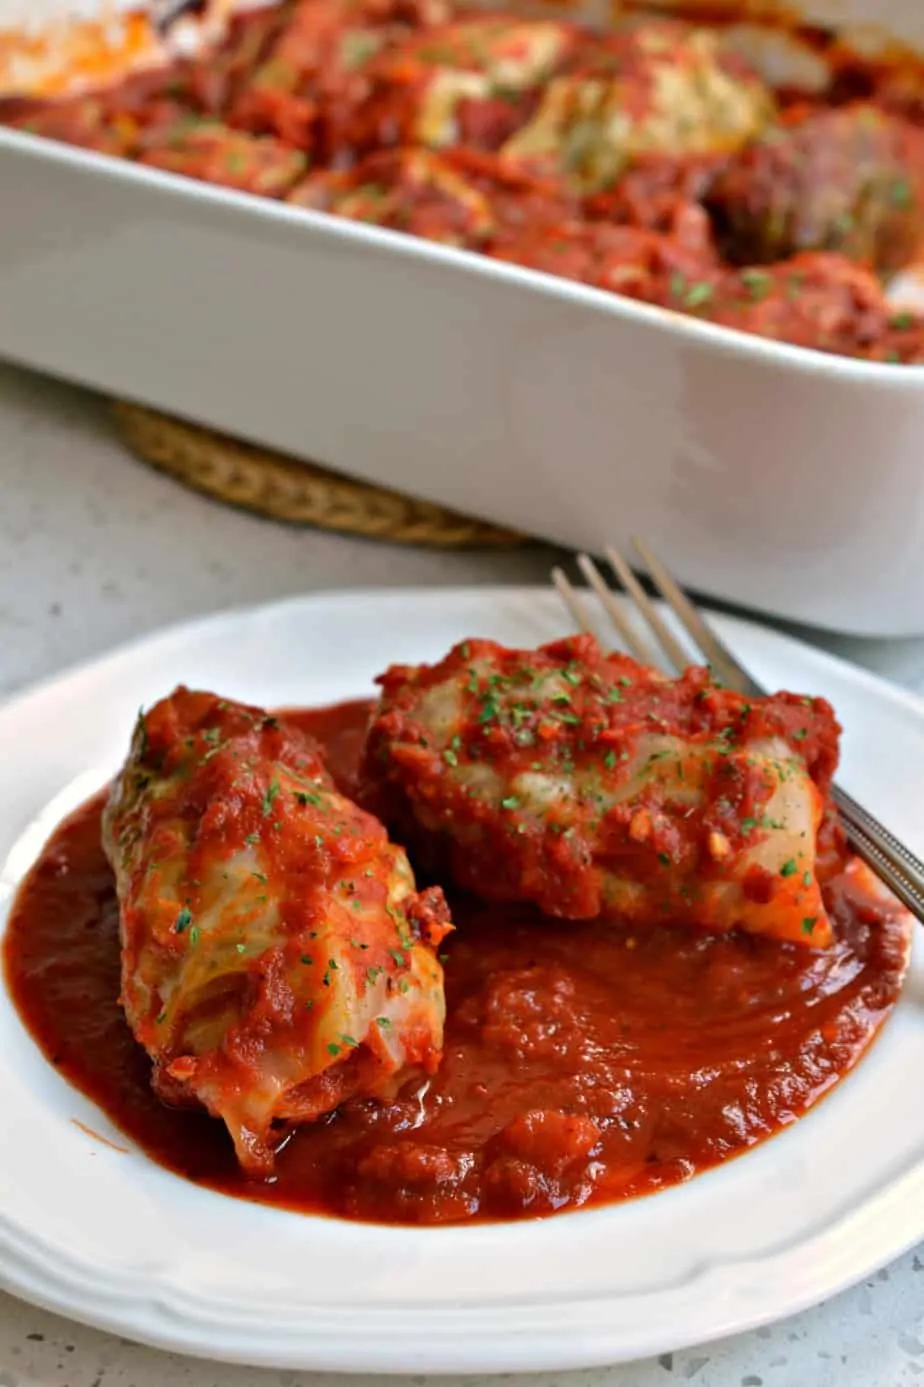 These traditional stuffed Cabbage Rolls are made with ground sausage and ground beef with a sweet and tangy tomato sauce.